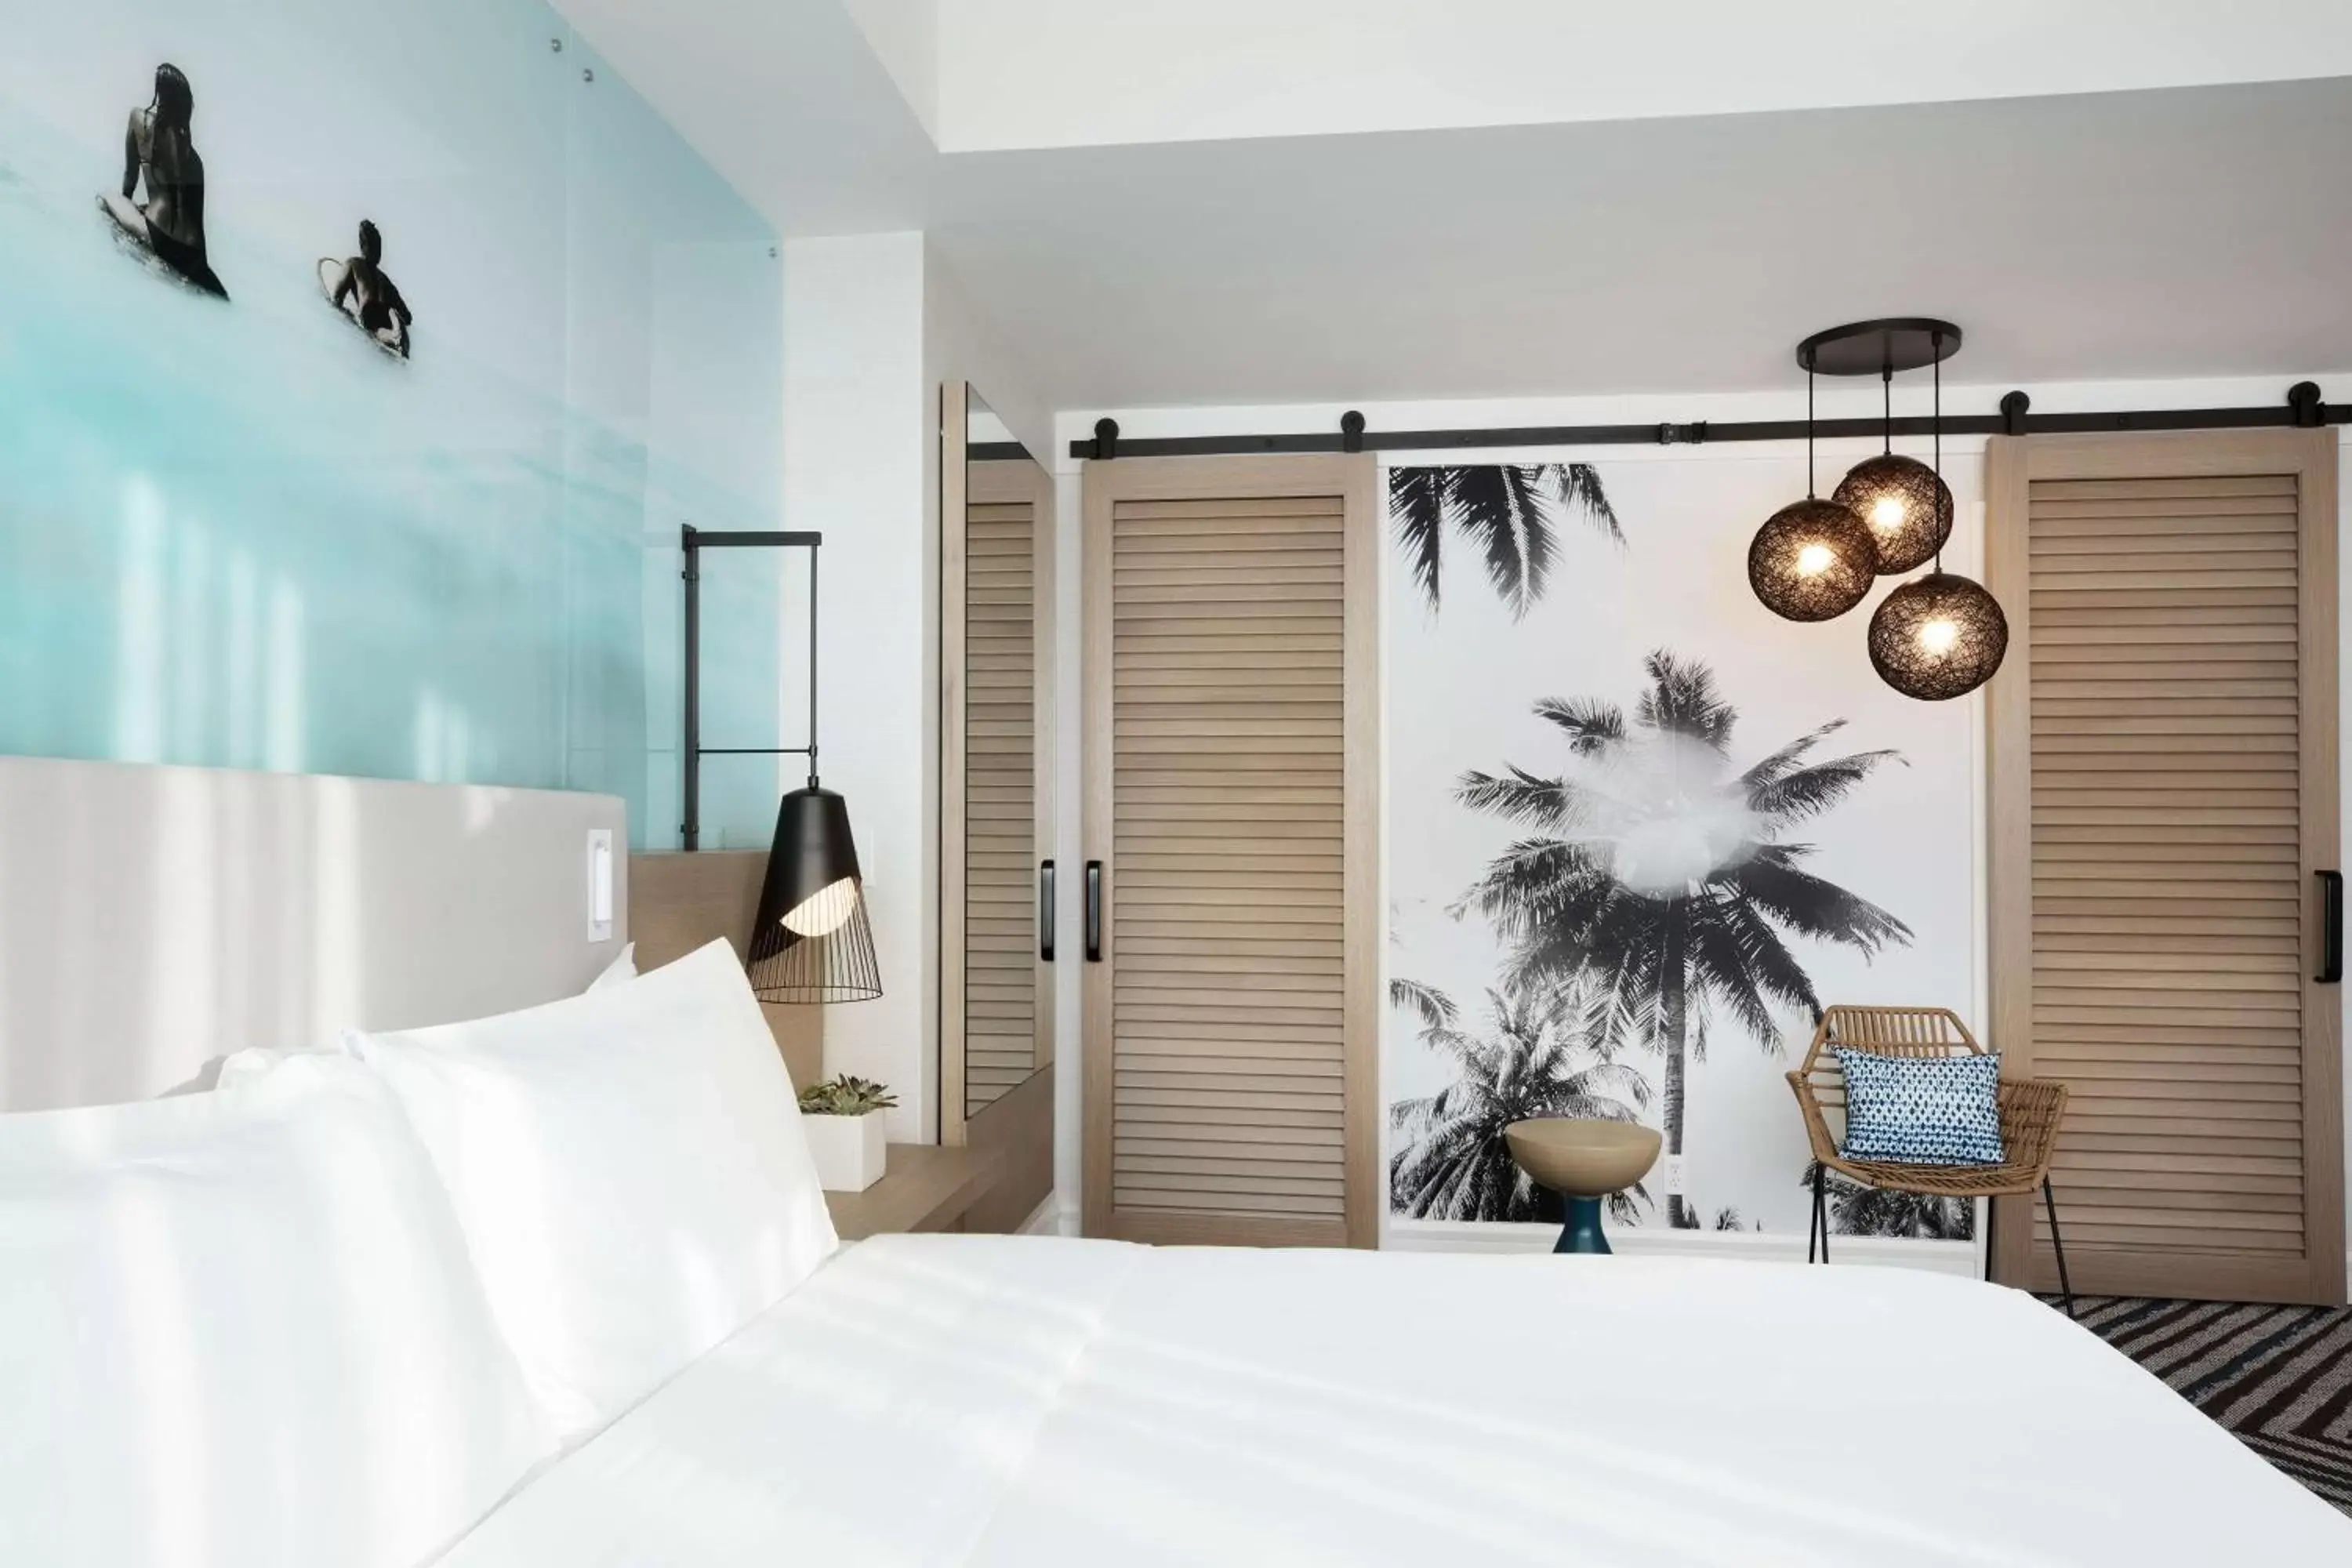 Bed in The Diplomat Beach Resort Hollywood, Curio Collection by Hilton